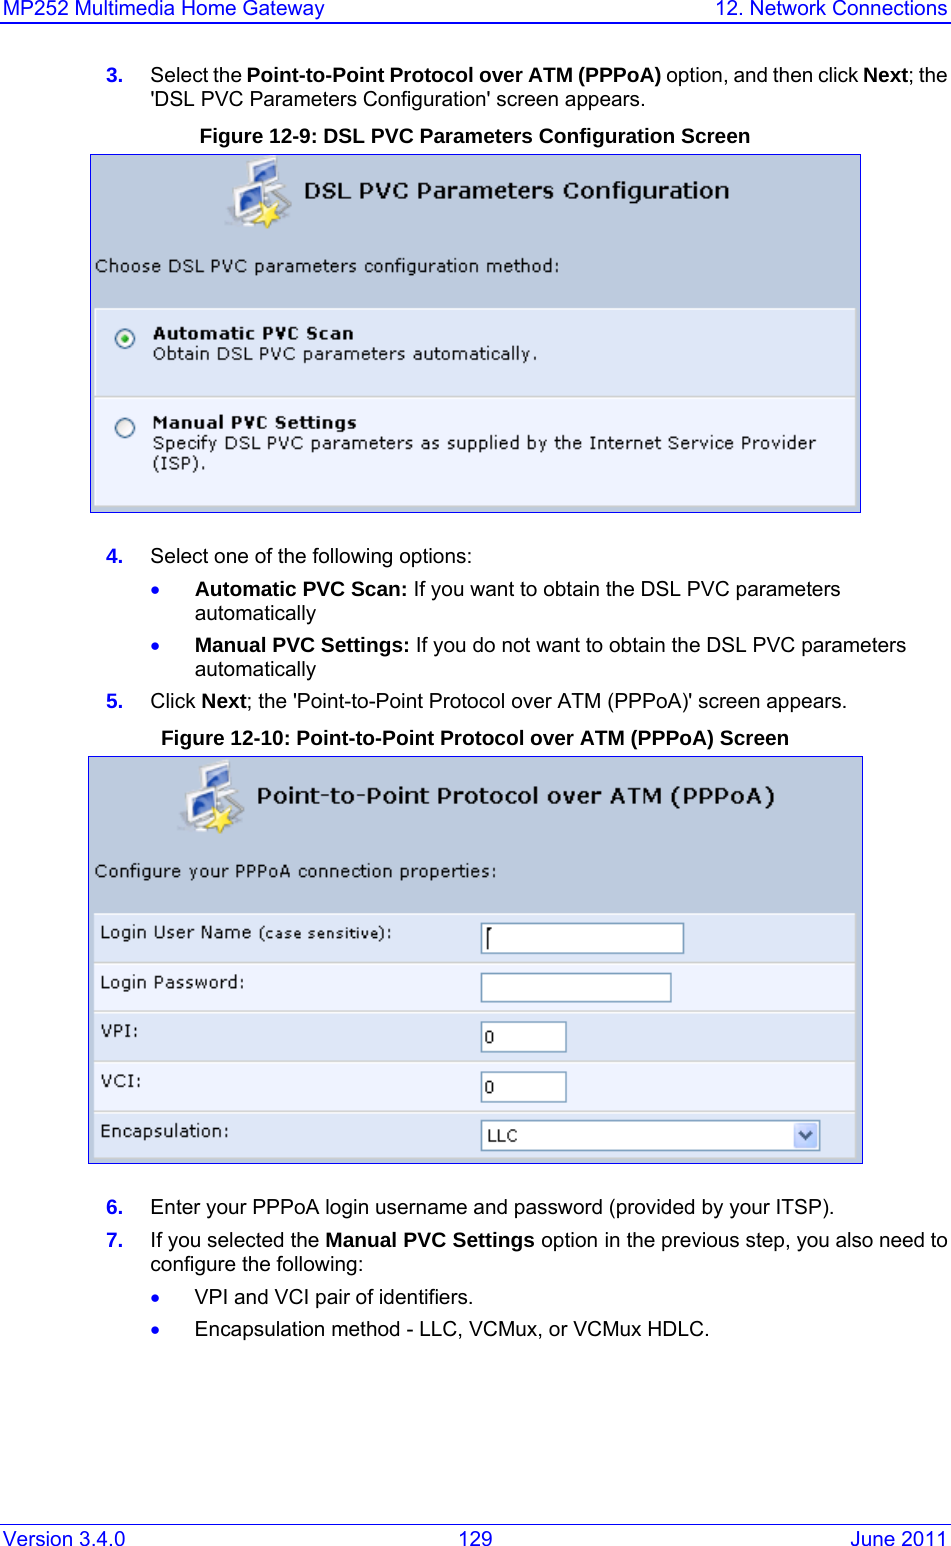 MP252 Multimedia Home Gateway  12. Network Connections Version 3.4.0  129  June 2011 3.  Select the Point-to-Point Protocol over ATM (PPPoA) option, and then click Next; the &apos;DSL PVC Parameters Configuration&apos; screen appears. Figure 12-9: DSL PVC Parameters Configuration Screen  4.  Select one of the following options: • Automatic PVC Scan: If you want to obtain the DSL PVC parameters automatically • Manual PVC Settings: If you do not want to obtain the DSL PVC parameters automatically  5.  Click Next; the &apos;Point-to-Point Protocol over ATM (PPPoA)&apos; screen appears. Figure 12-10: Point-to-Point Protocol over ATM (PPPoA) Screen  6.  Enter your PPPoA login username and password (provided by your ITSP). 7.  If you selected the Manual PVC Settings option in the previous step, you also need to configure the following: • VPI and VCI pair of identifiers. • Encapsulation method - LLC, VCMux, or VCMux HDLC. 